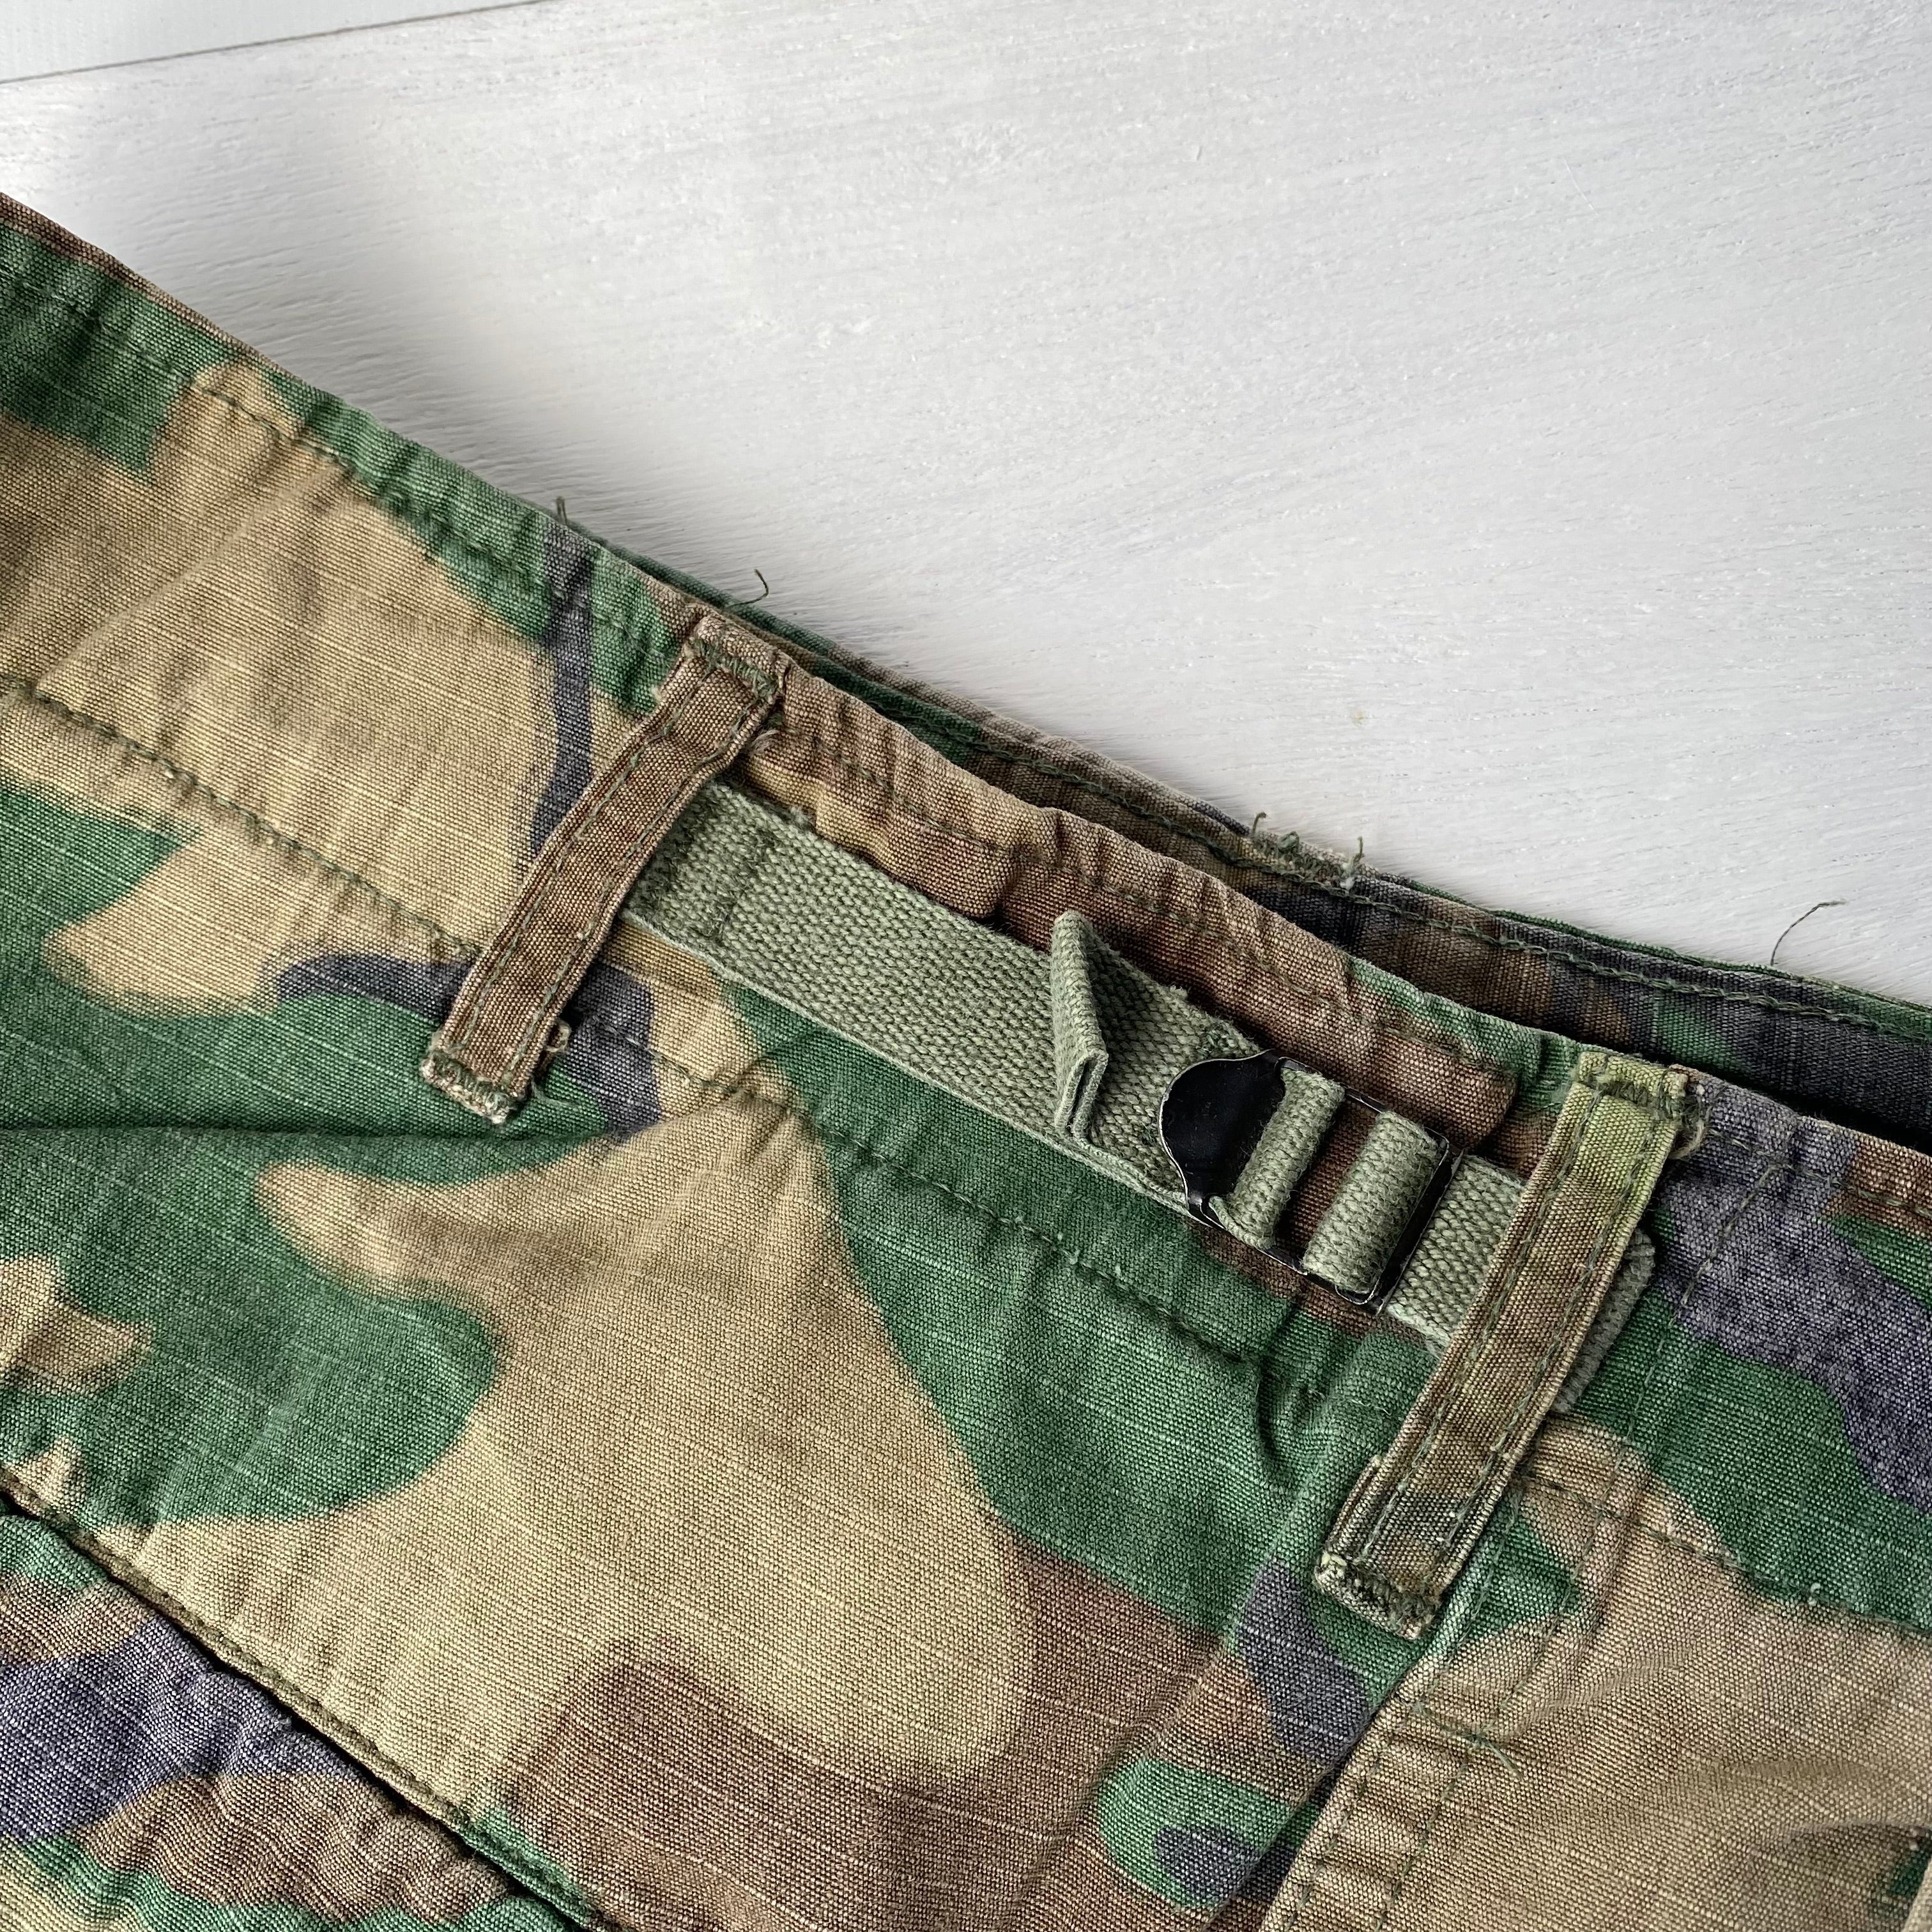 [ONLY ONE!] US ARMED FORCES M-51 FIELD TROUSERS / Mr.Clean Select